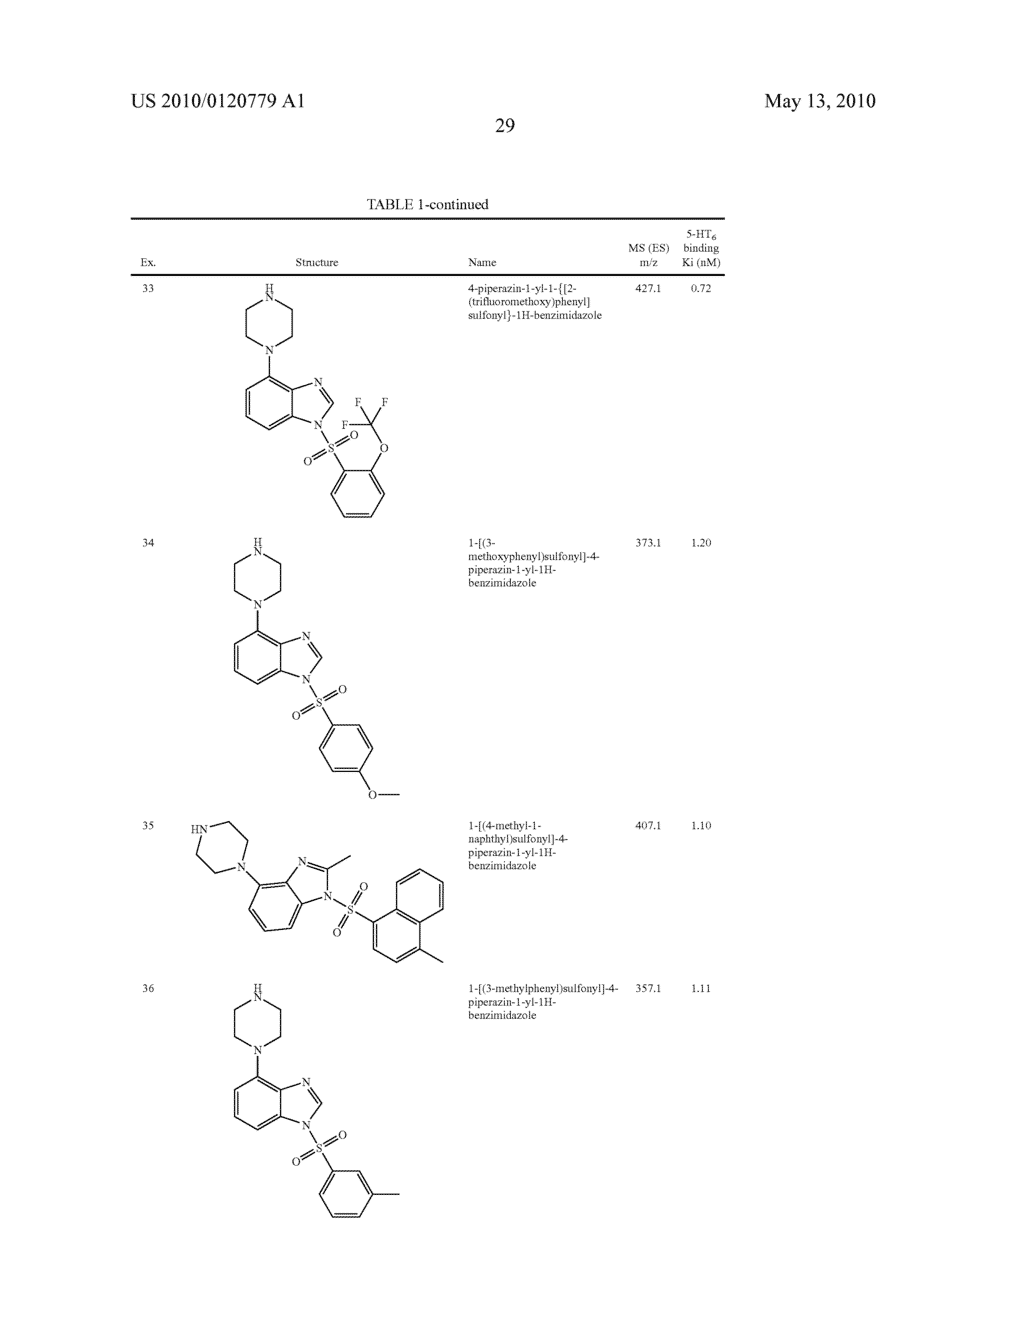 1-(ARYLSULFONYL)-4-(PIPERAZIN-1-YL)-1H-BENZIMIDAZOLES AS 5-HYDROXYTRYPTAMINE-6 LIGANDS - diagram, schematic, and image 30